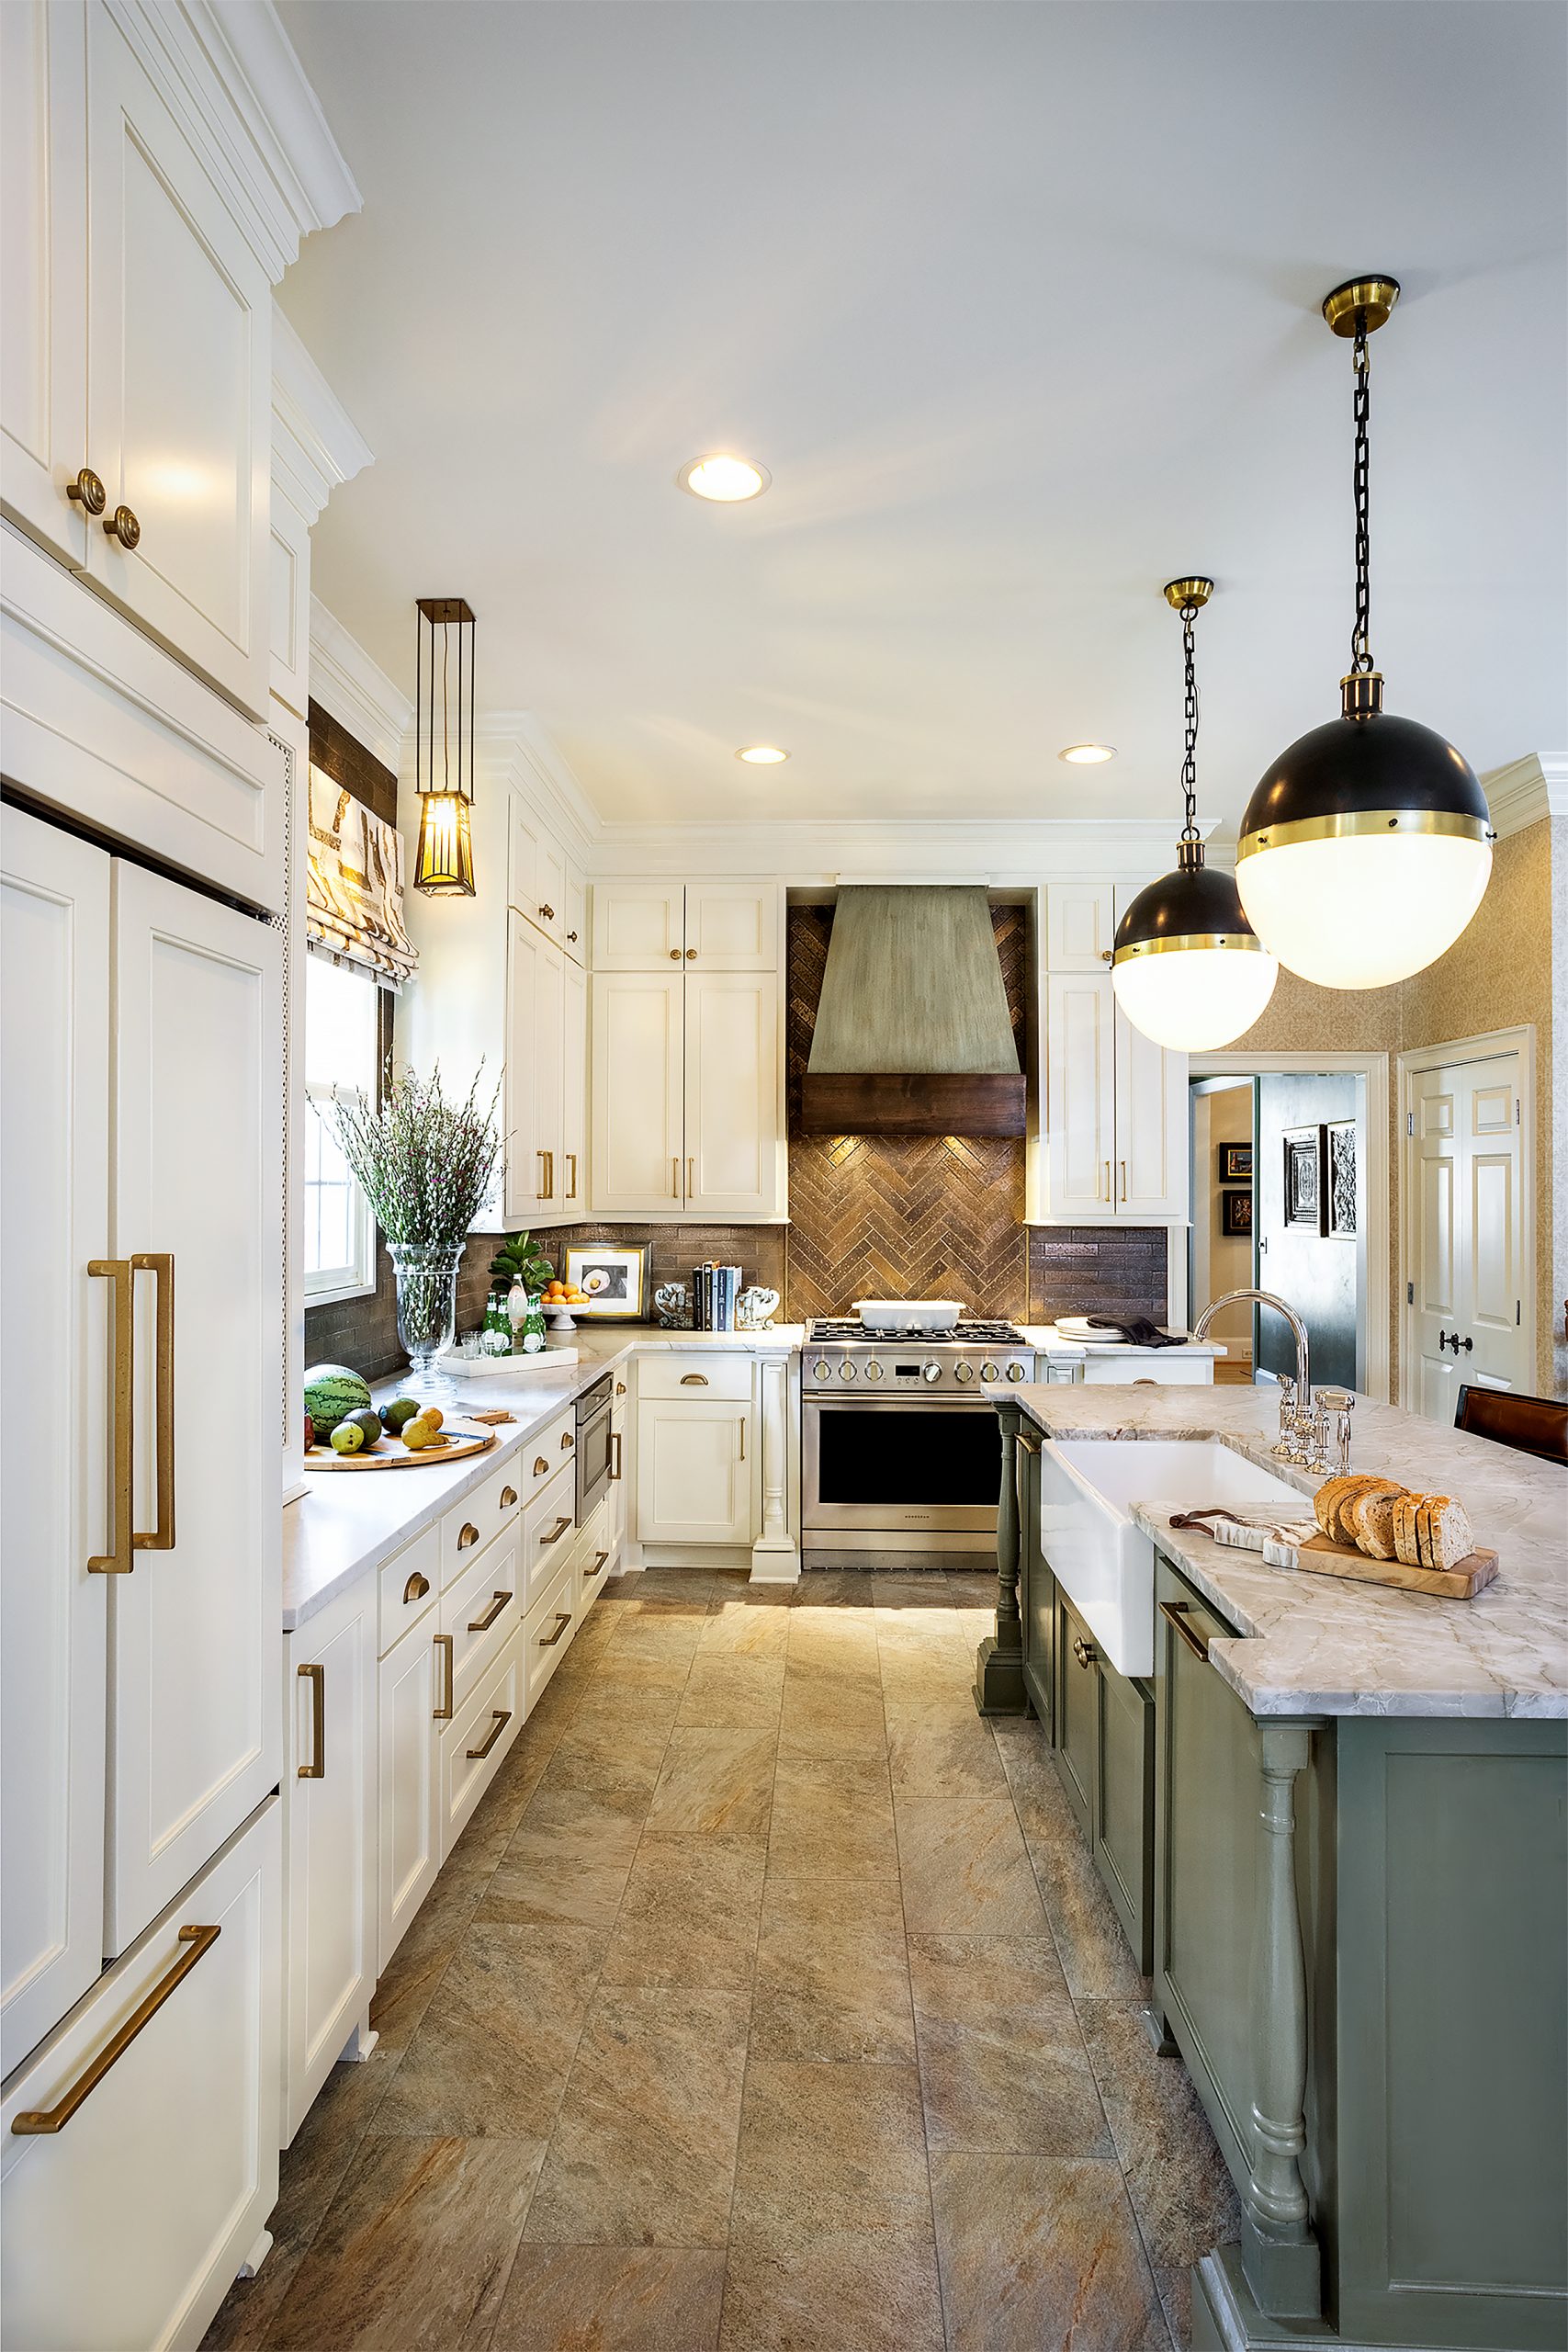 Cathy, a marvelous cook, loves the warm inviting kitchen with impressive appliances, stylish pendant lights, quartz countertops, and copper backsplash. Cathy and Cal enjoy incorporating generational pieces into their design.